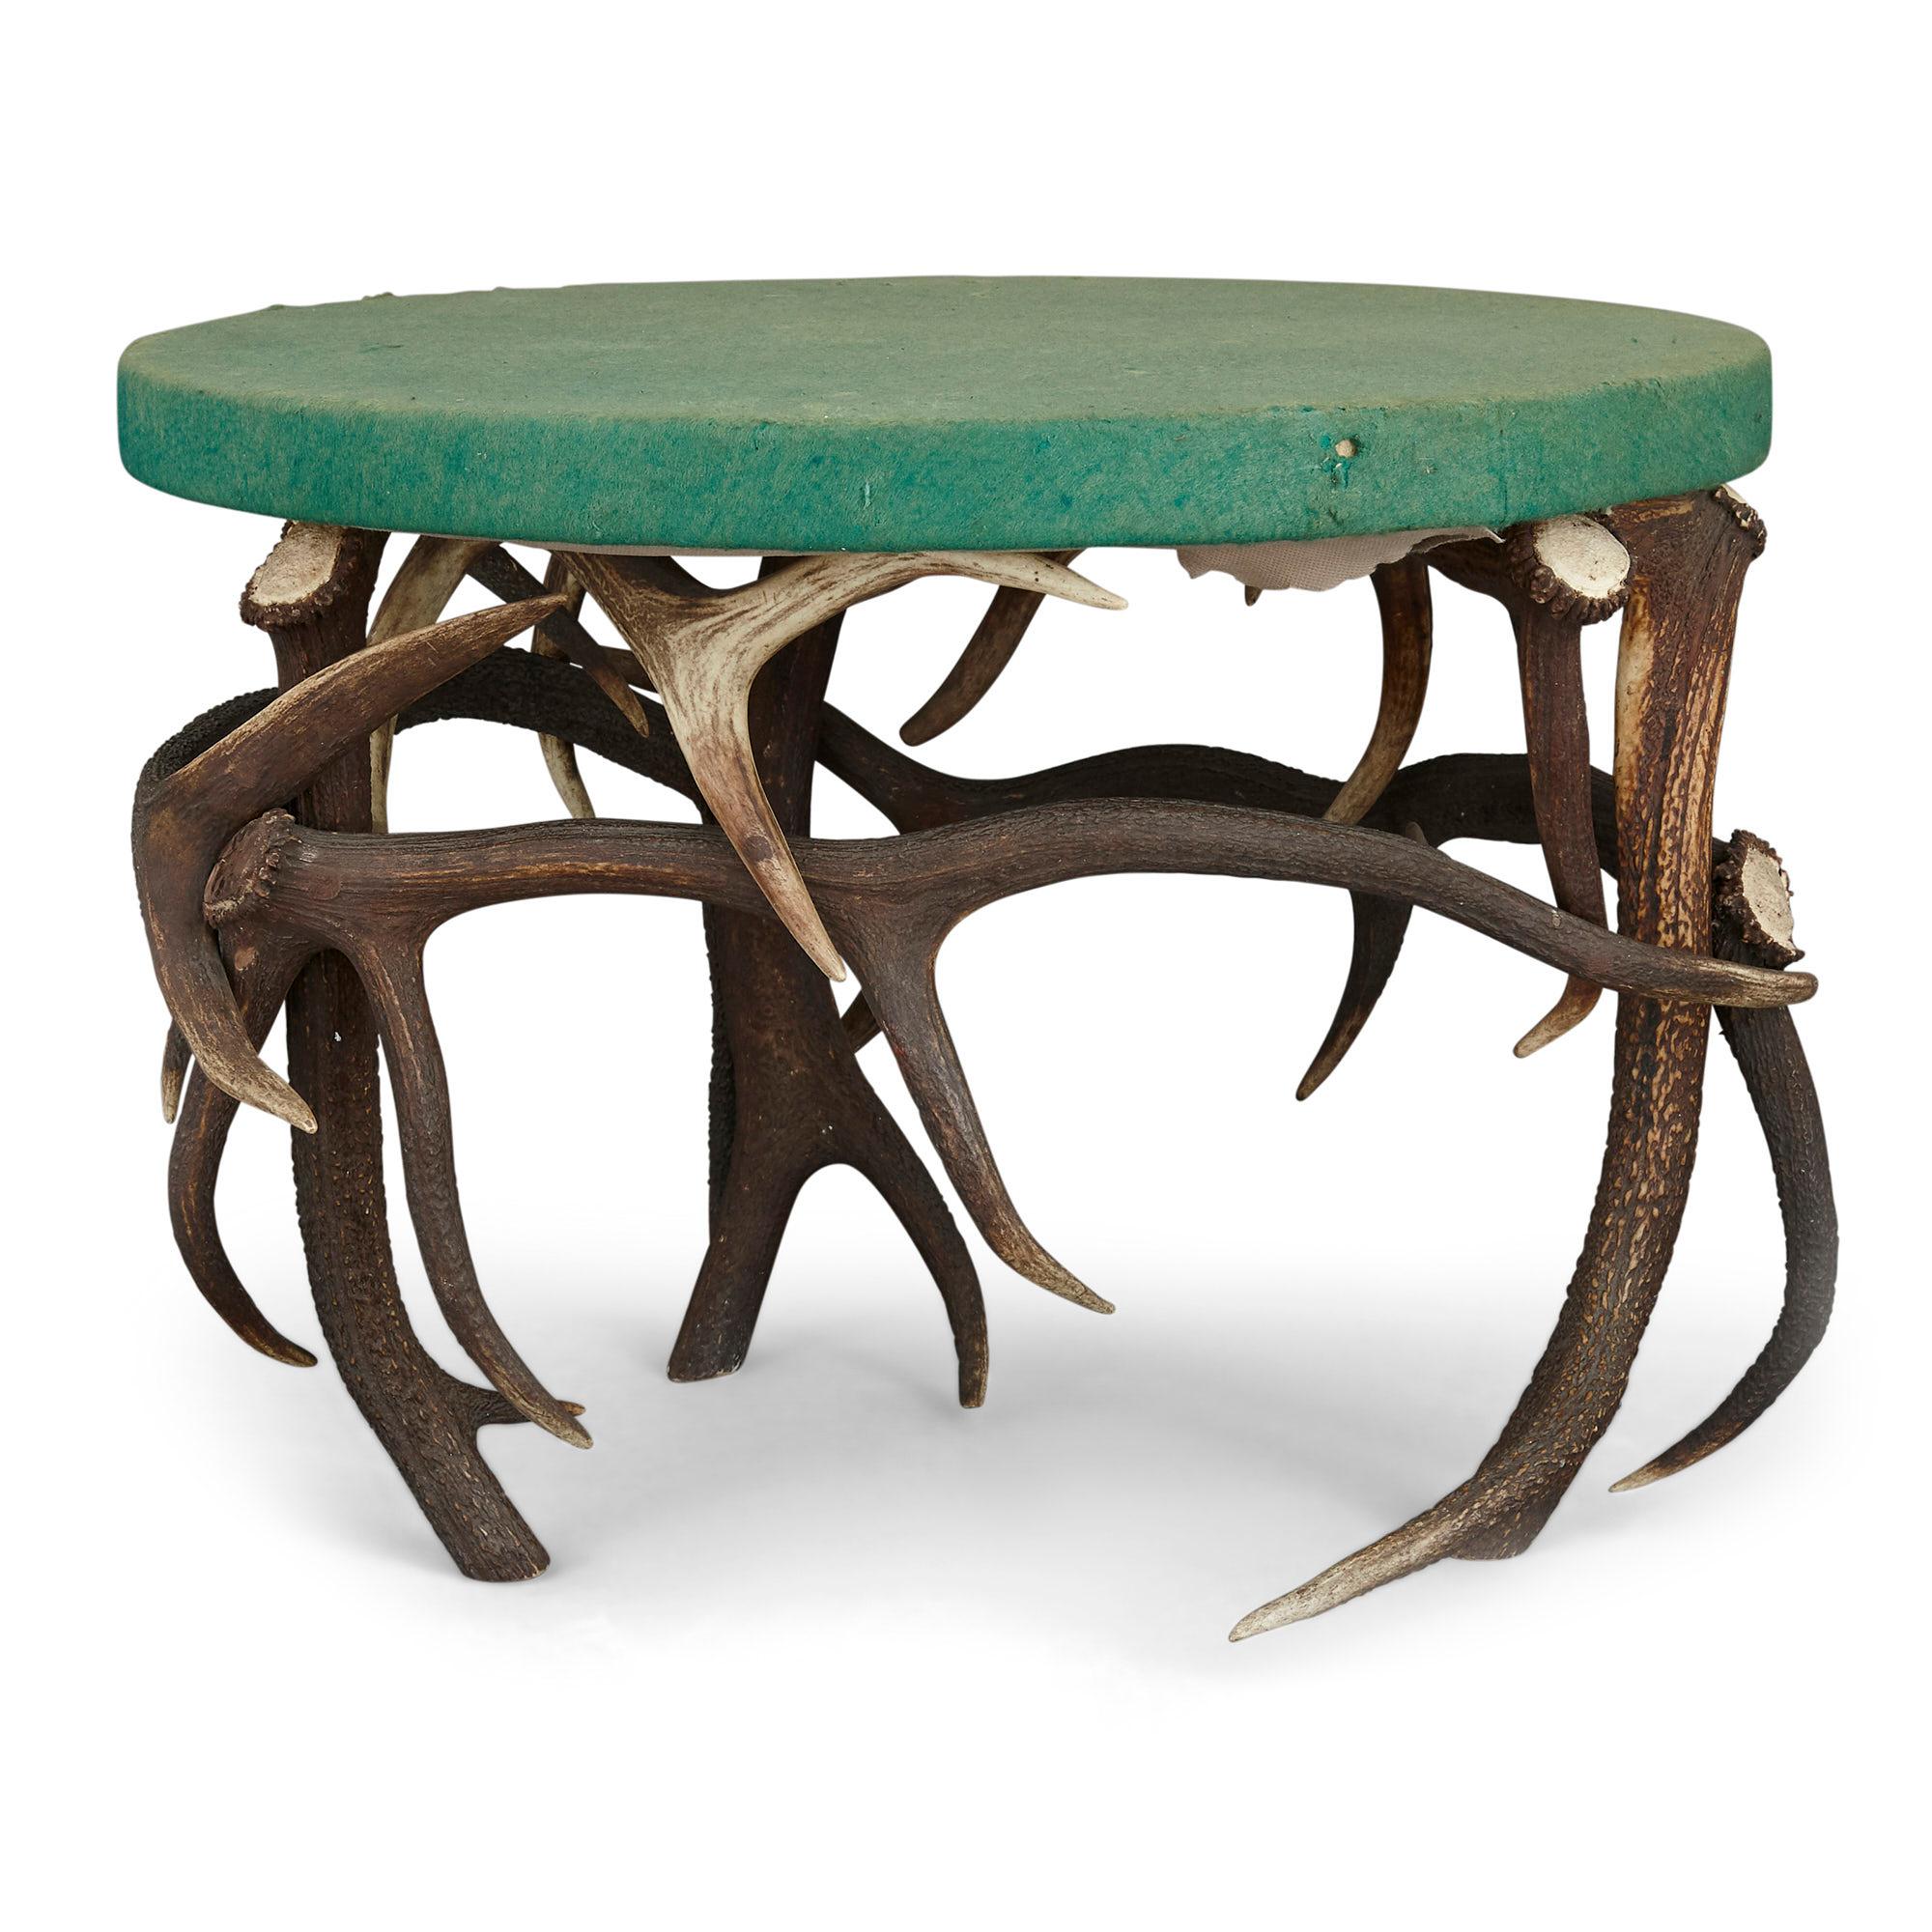 German antler circular coffee table with green felt top.
German, early 20th century
Dimensions: Height 53cm, diameter 72cm

This unusual table, an example of 'antler-seat furniture', was likely crafted in Germany in the early 20th Century. It